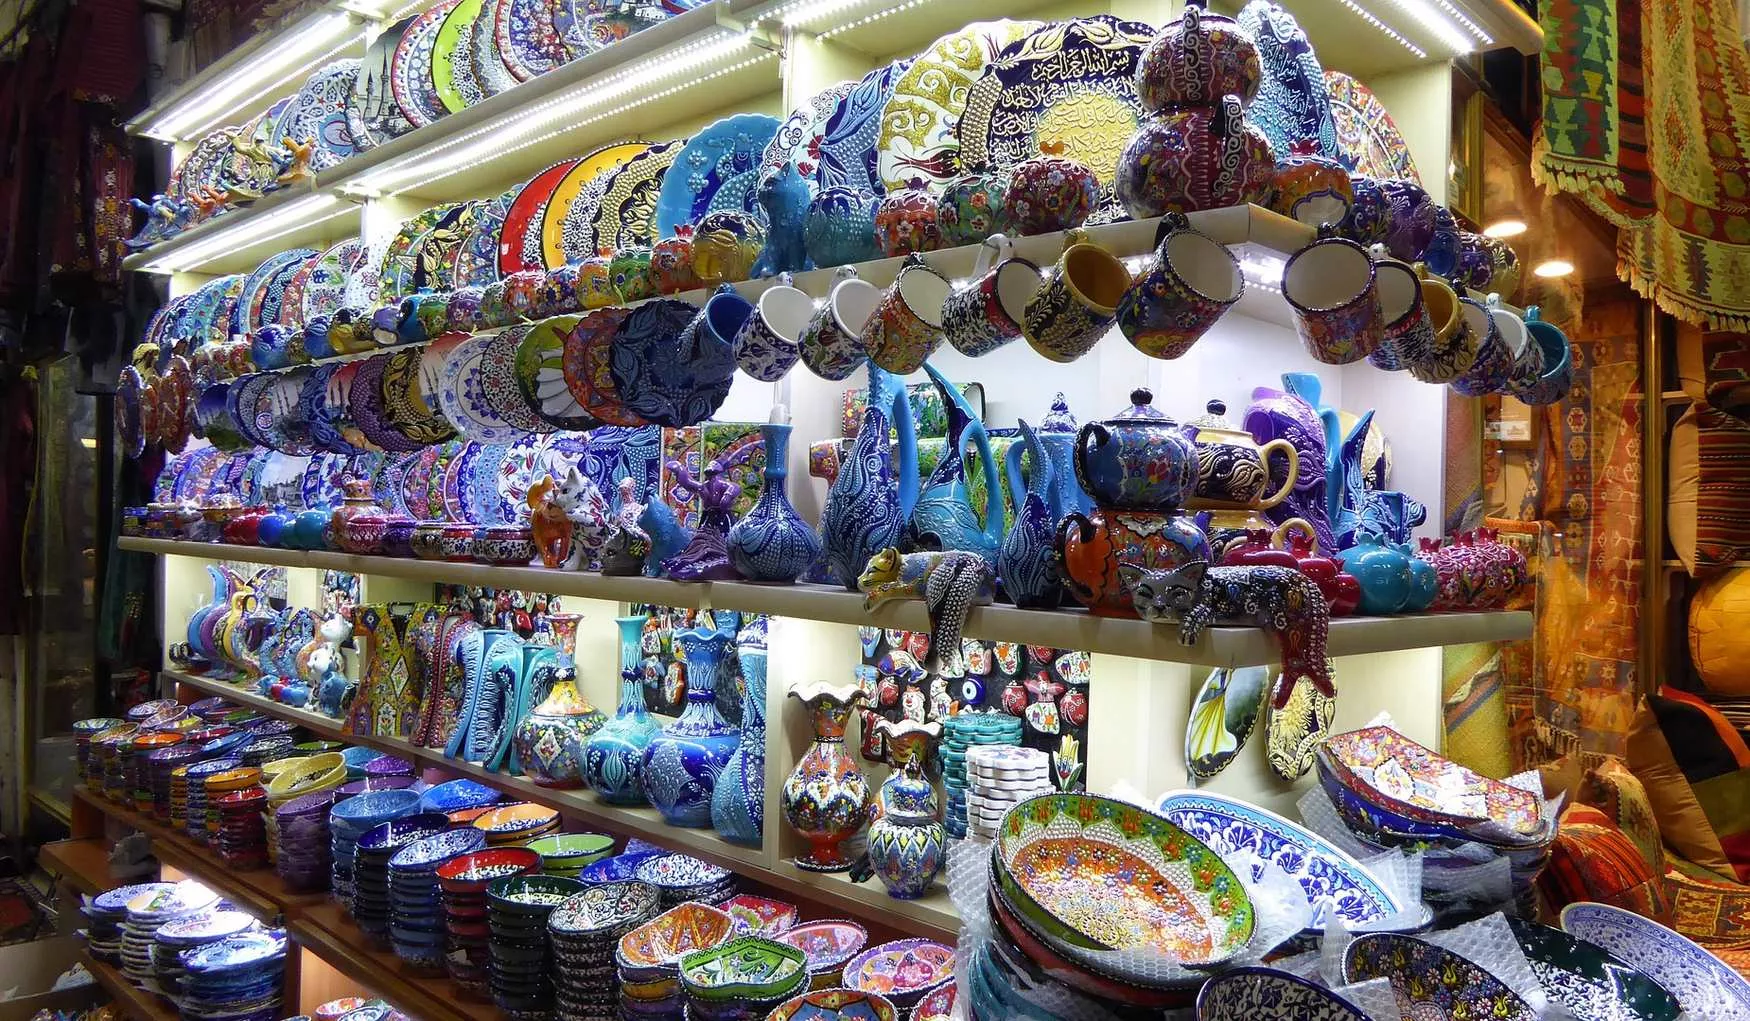 Ruby Ceramics & Gift Shop in Turkey, central_asia | Gifts,Other Crafts,Handicrafts - Rated 4.9